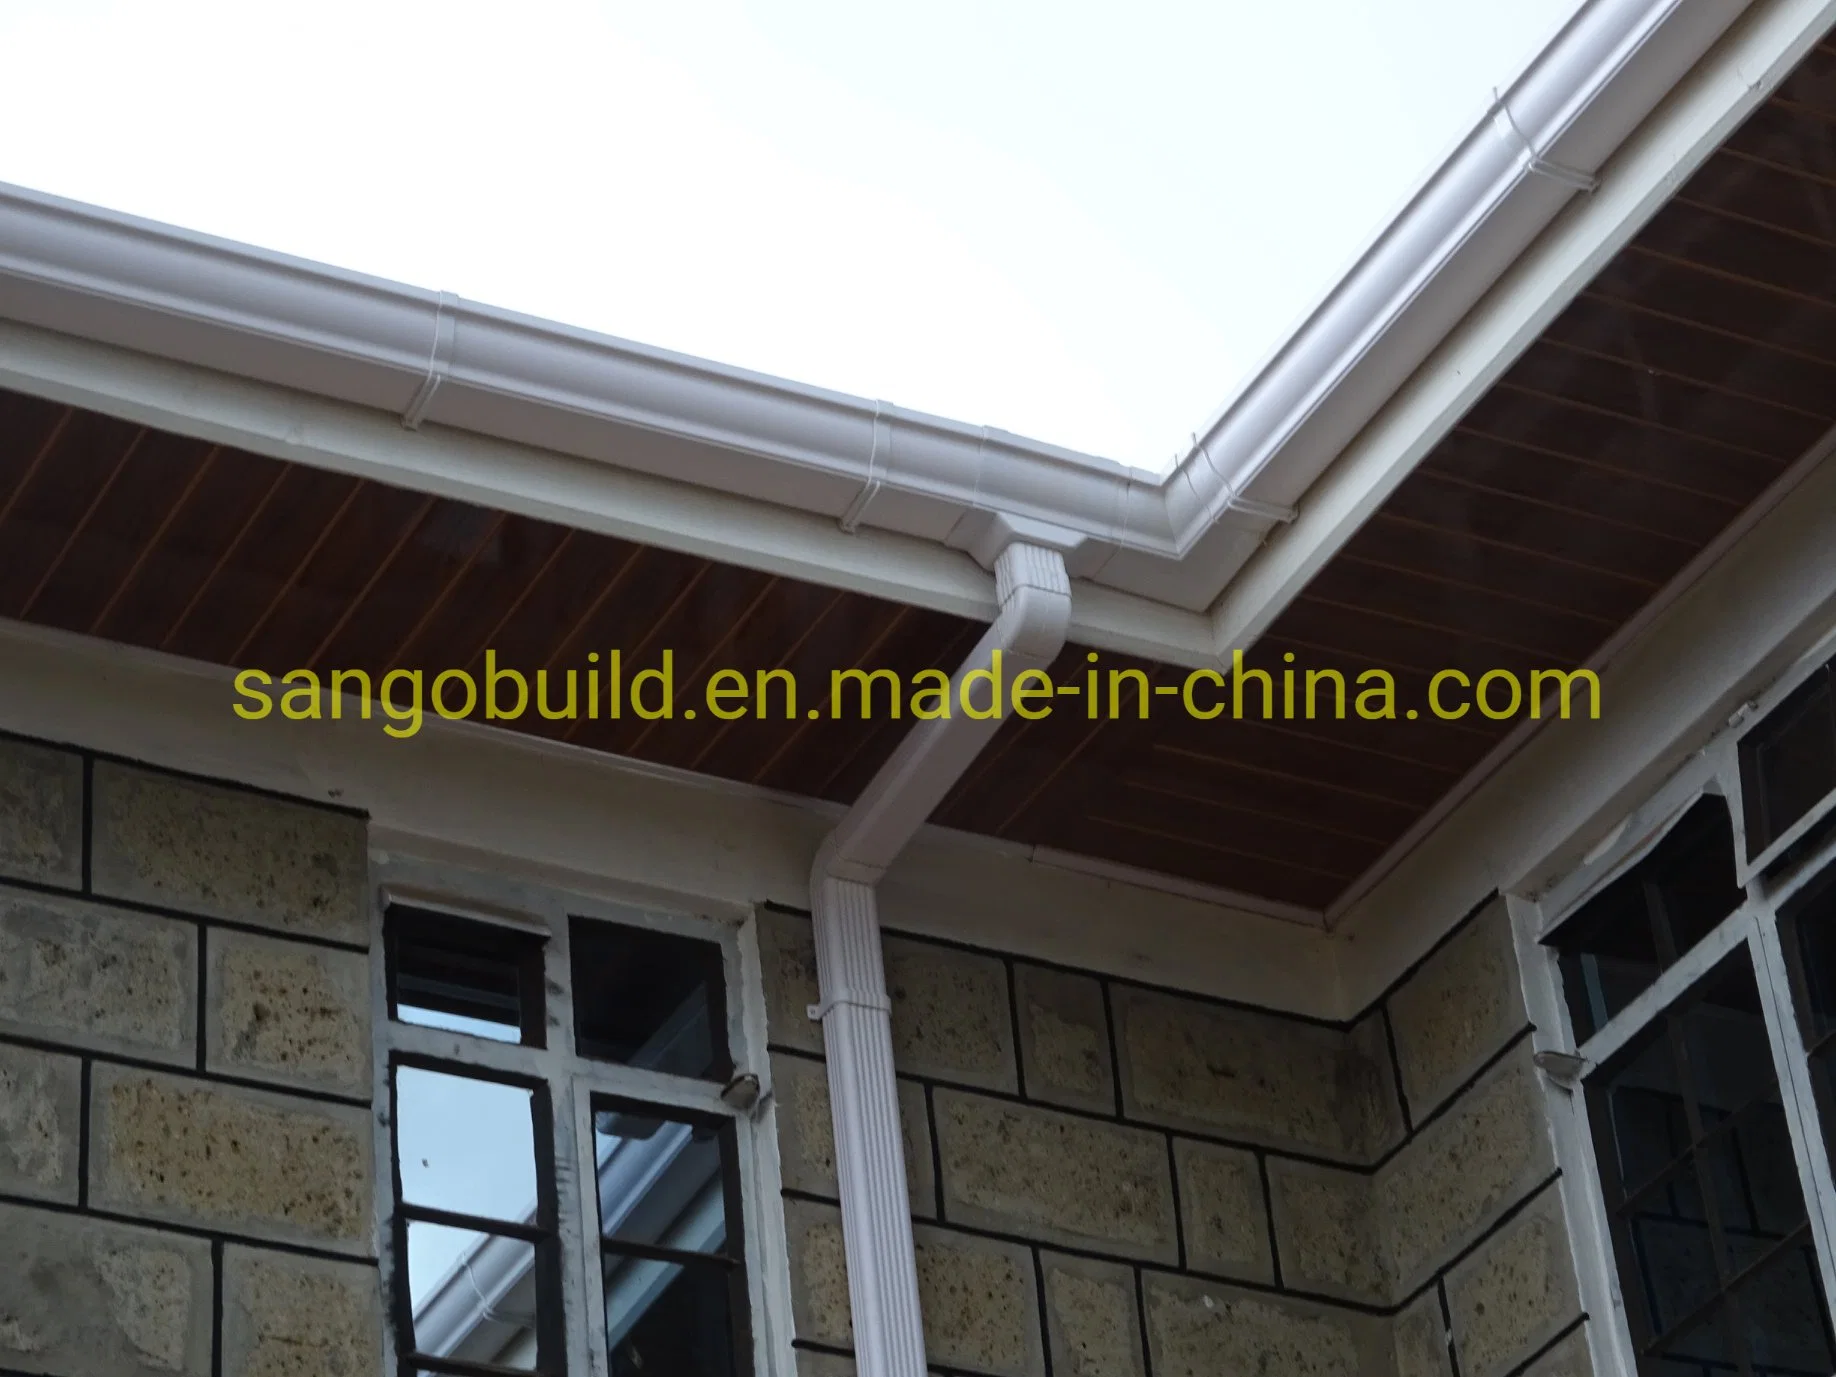 PVC Rain Water Gutter Roofing Guttering UPVC Gutter Downspout and Pipe Fittings Building Materials